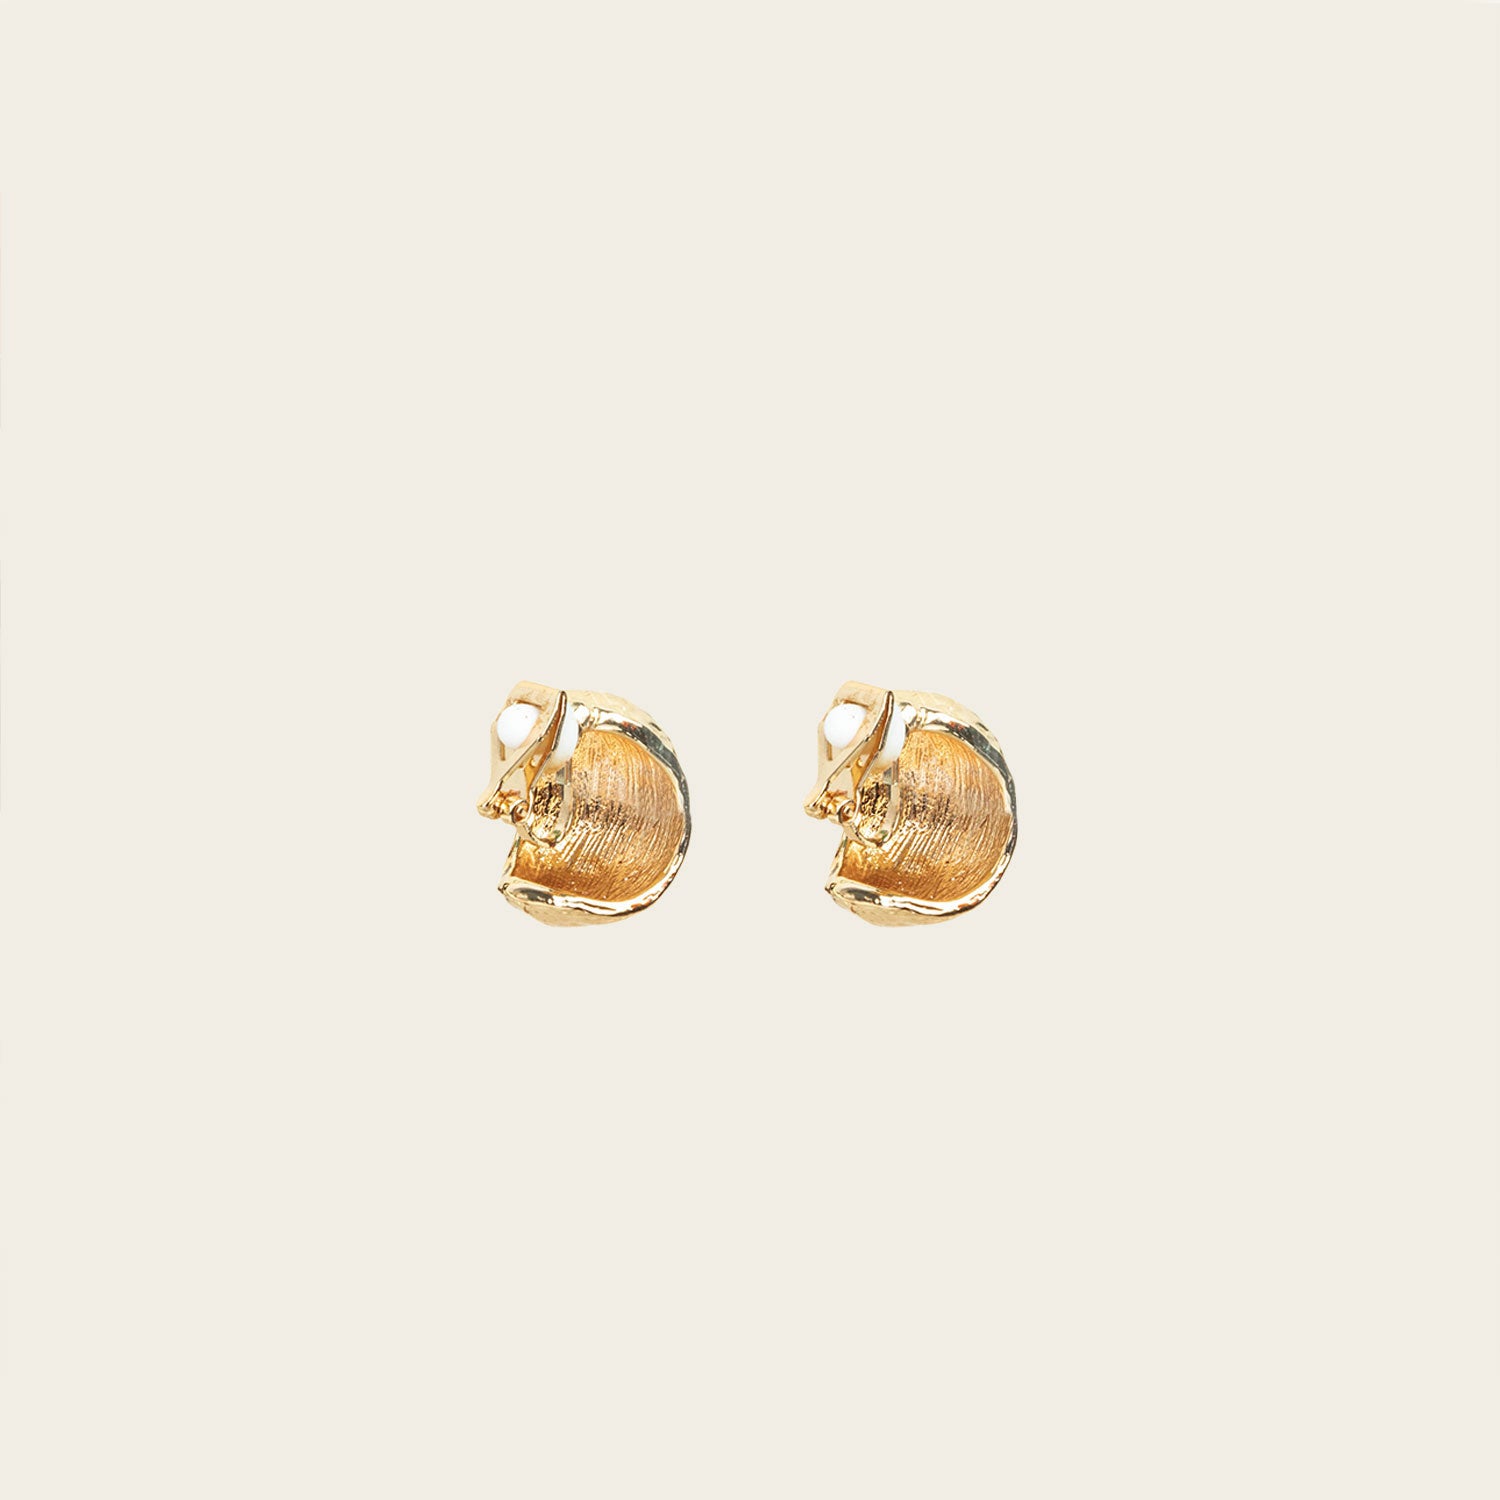 Image of the Alaia Clip On Earrings in Gold feature a padded clip-on closure, offering secure hold and ideal comfort for 8-12 hours of wear, for ear types of all shapes and sizes. Crafted from gold tone copper alloy, these earrings feature a single pair per item.